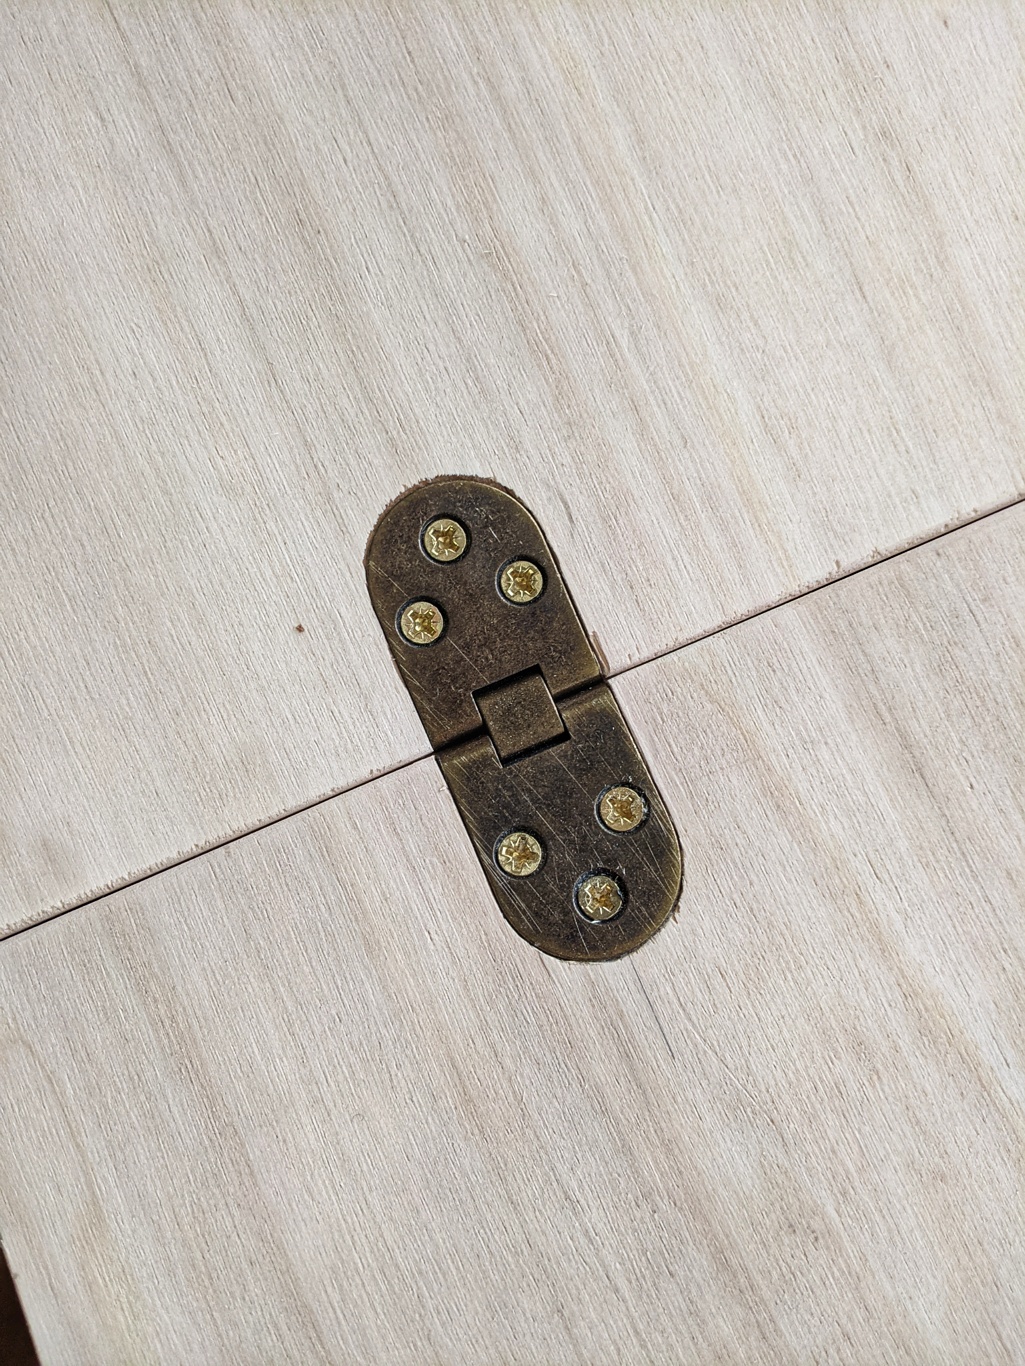 Counter-flap hinges in poplar ply